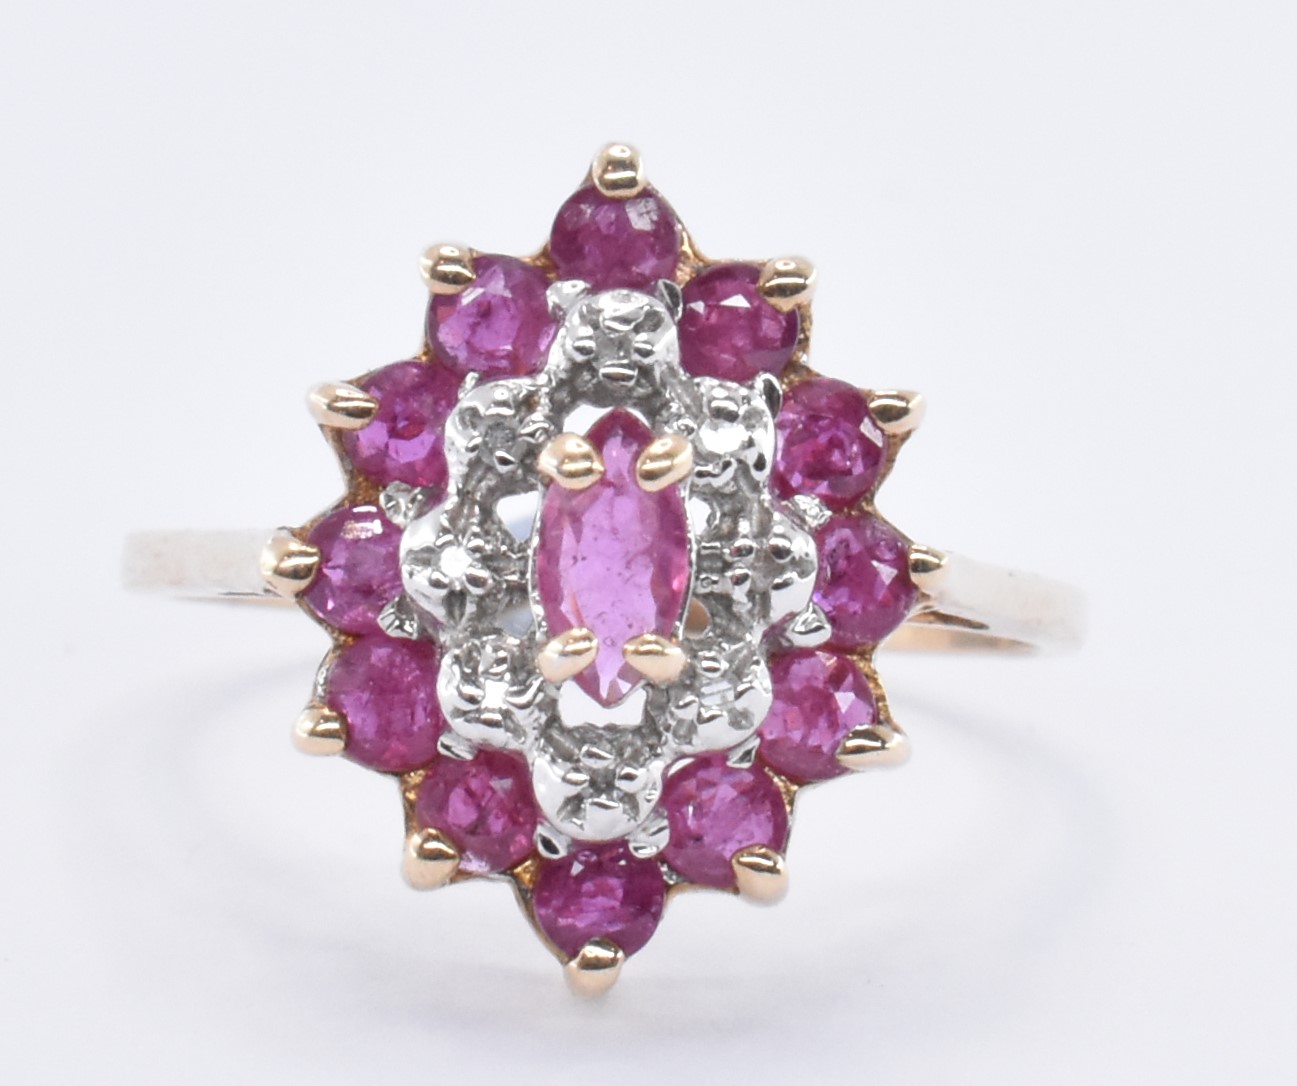 9CT GOLD CLUSTER RING WITH RUBIES AND DIAMONDS - Image 3 of 7